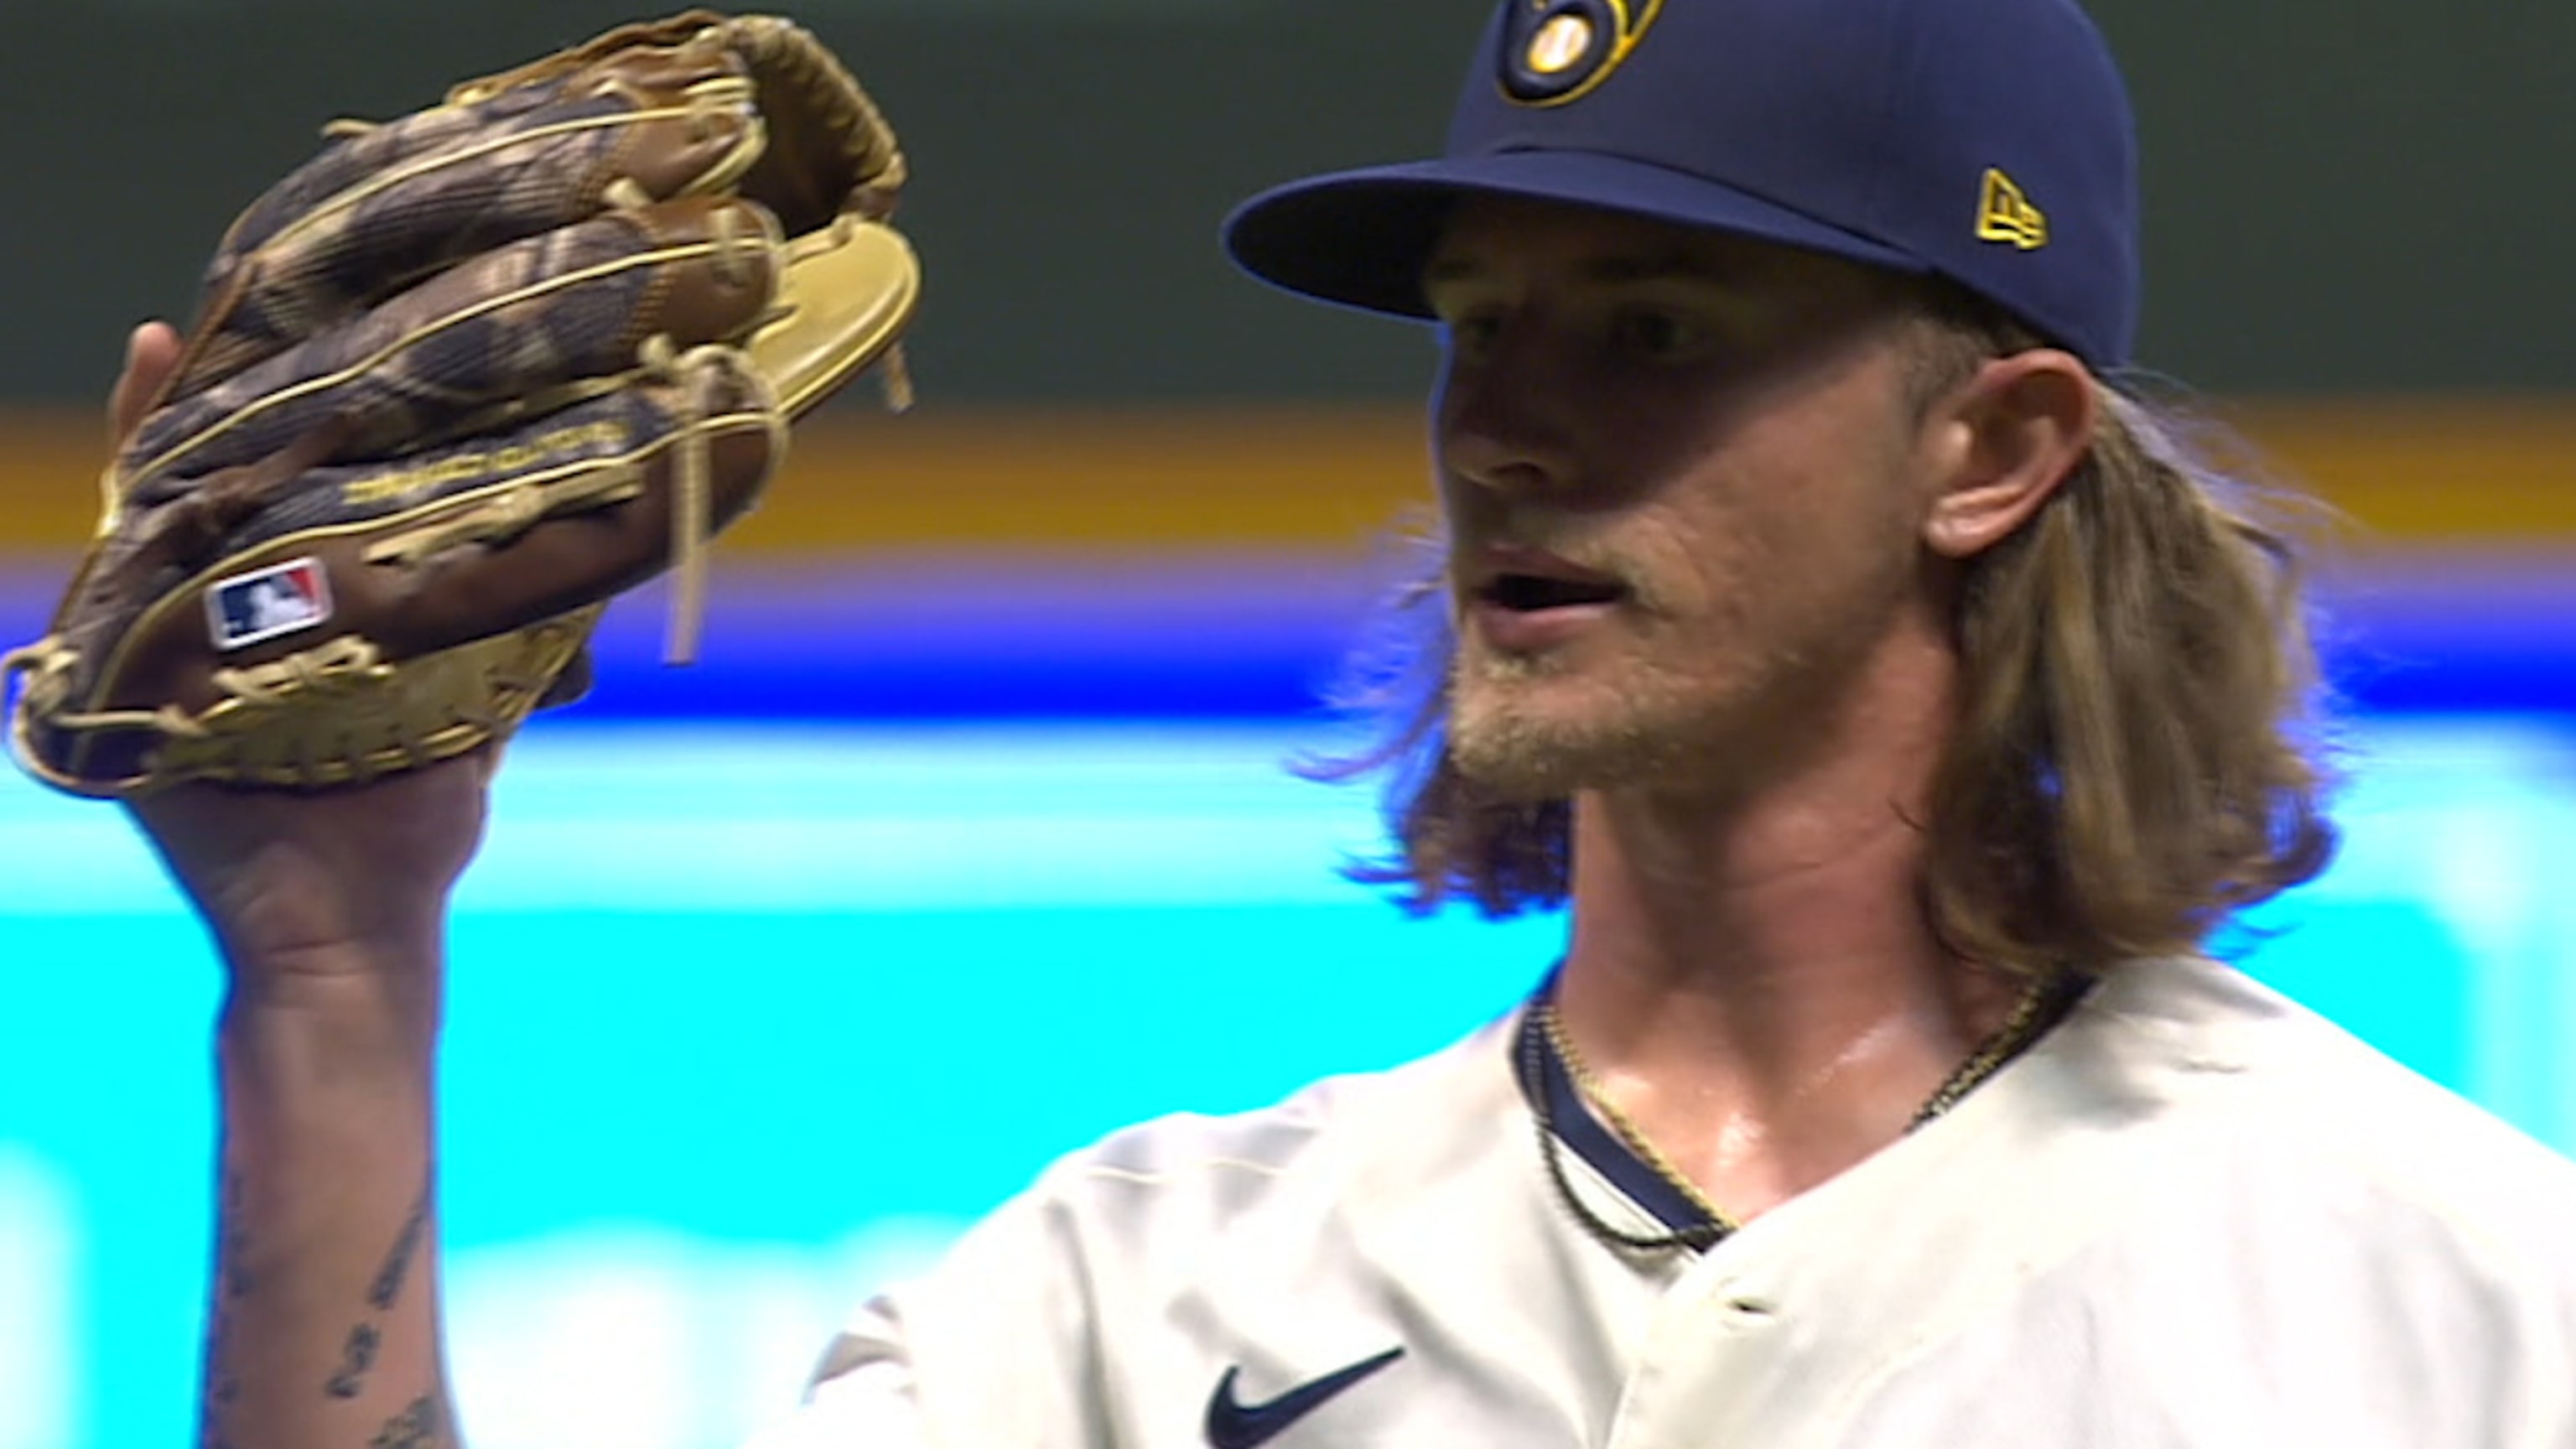 Hader earns 37th straight scoreless appearance as Brewers beat